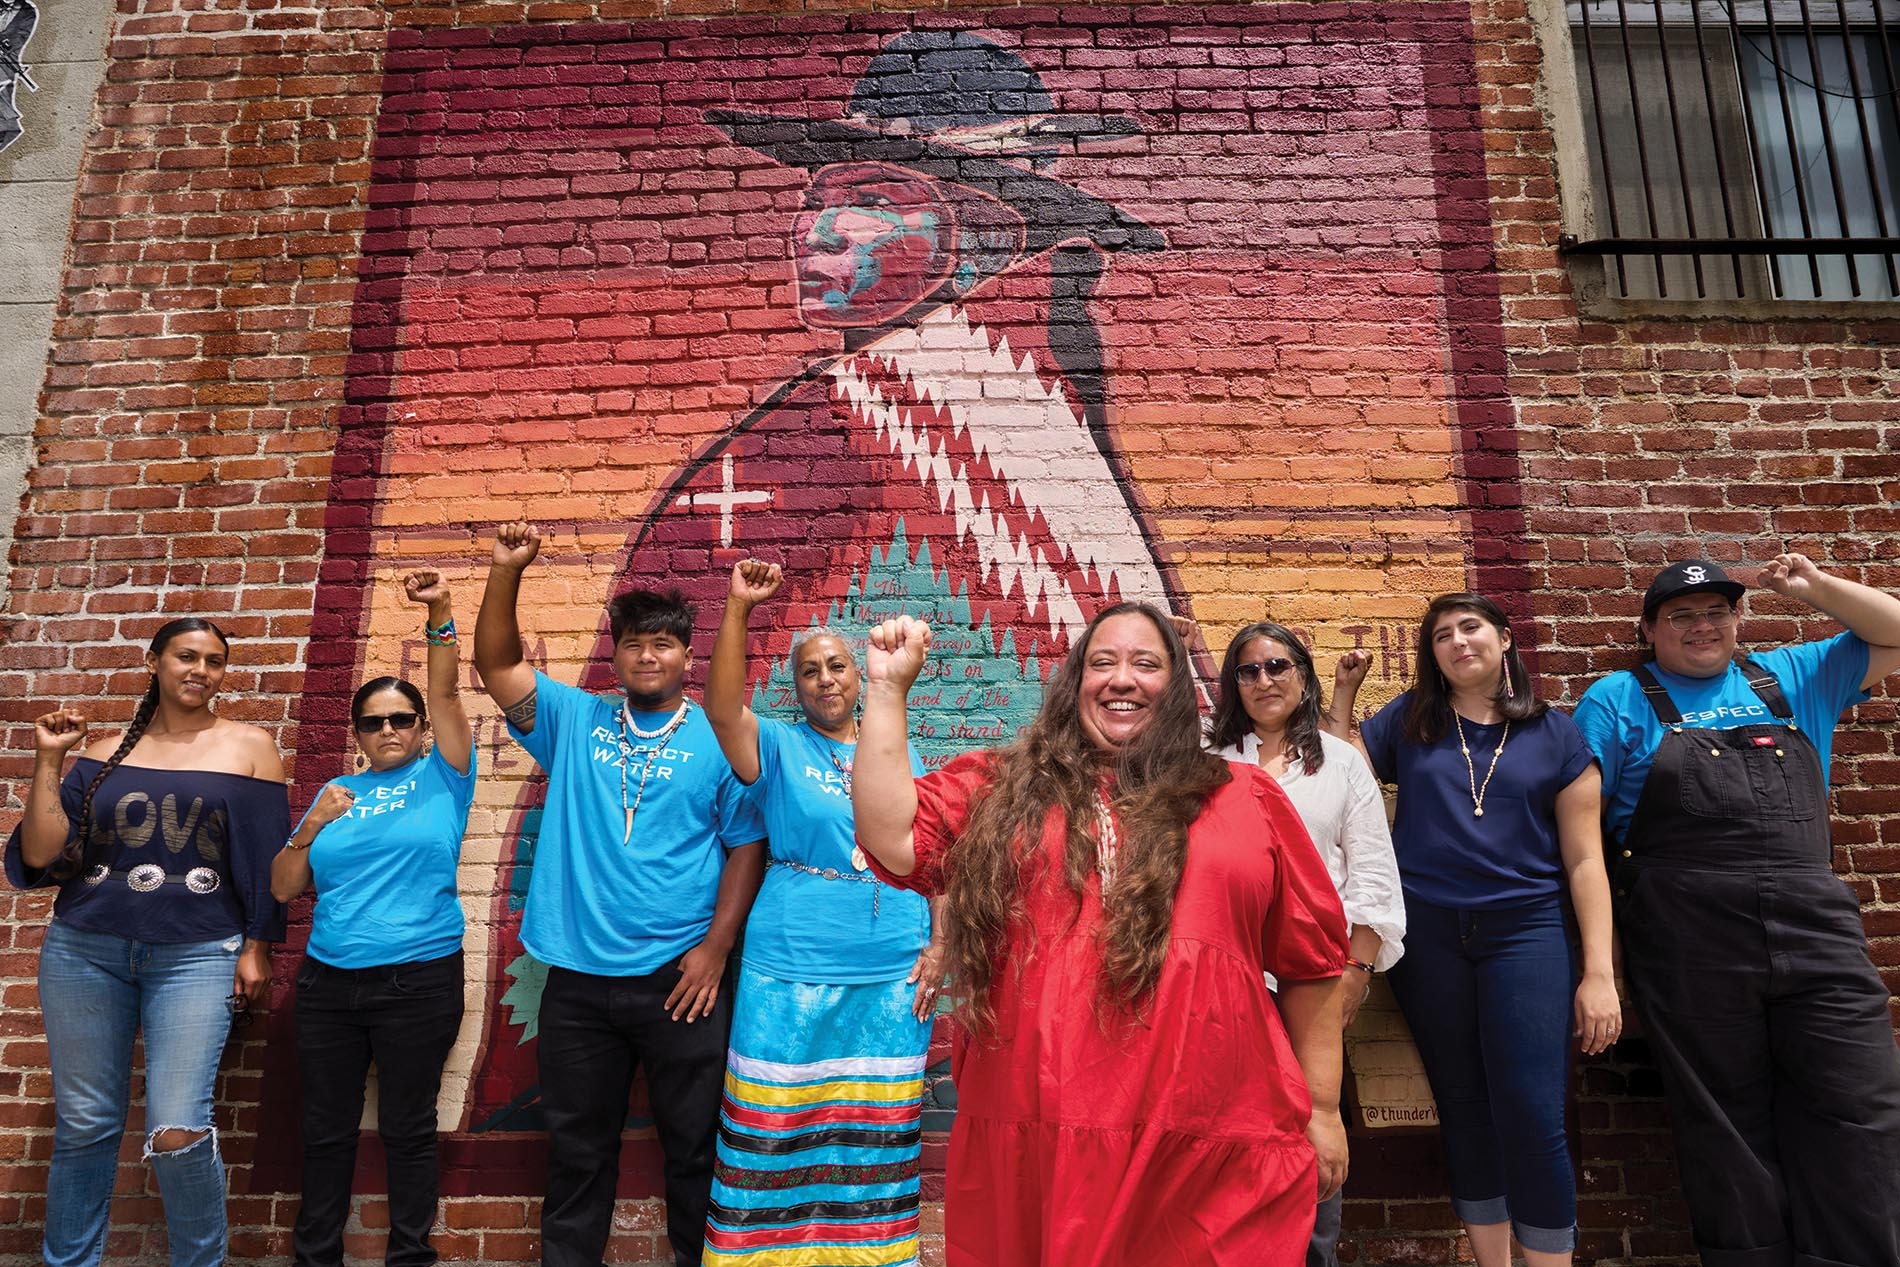 Image of Angela Mooney D'Arcy and staff holding their fists up in front of a mural on a brick wall.